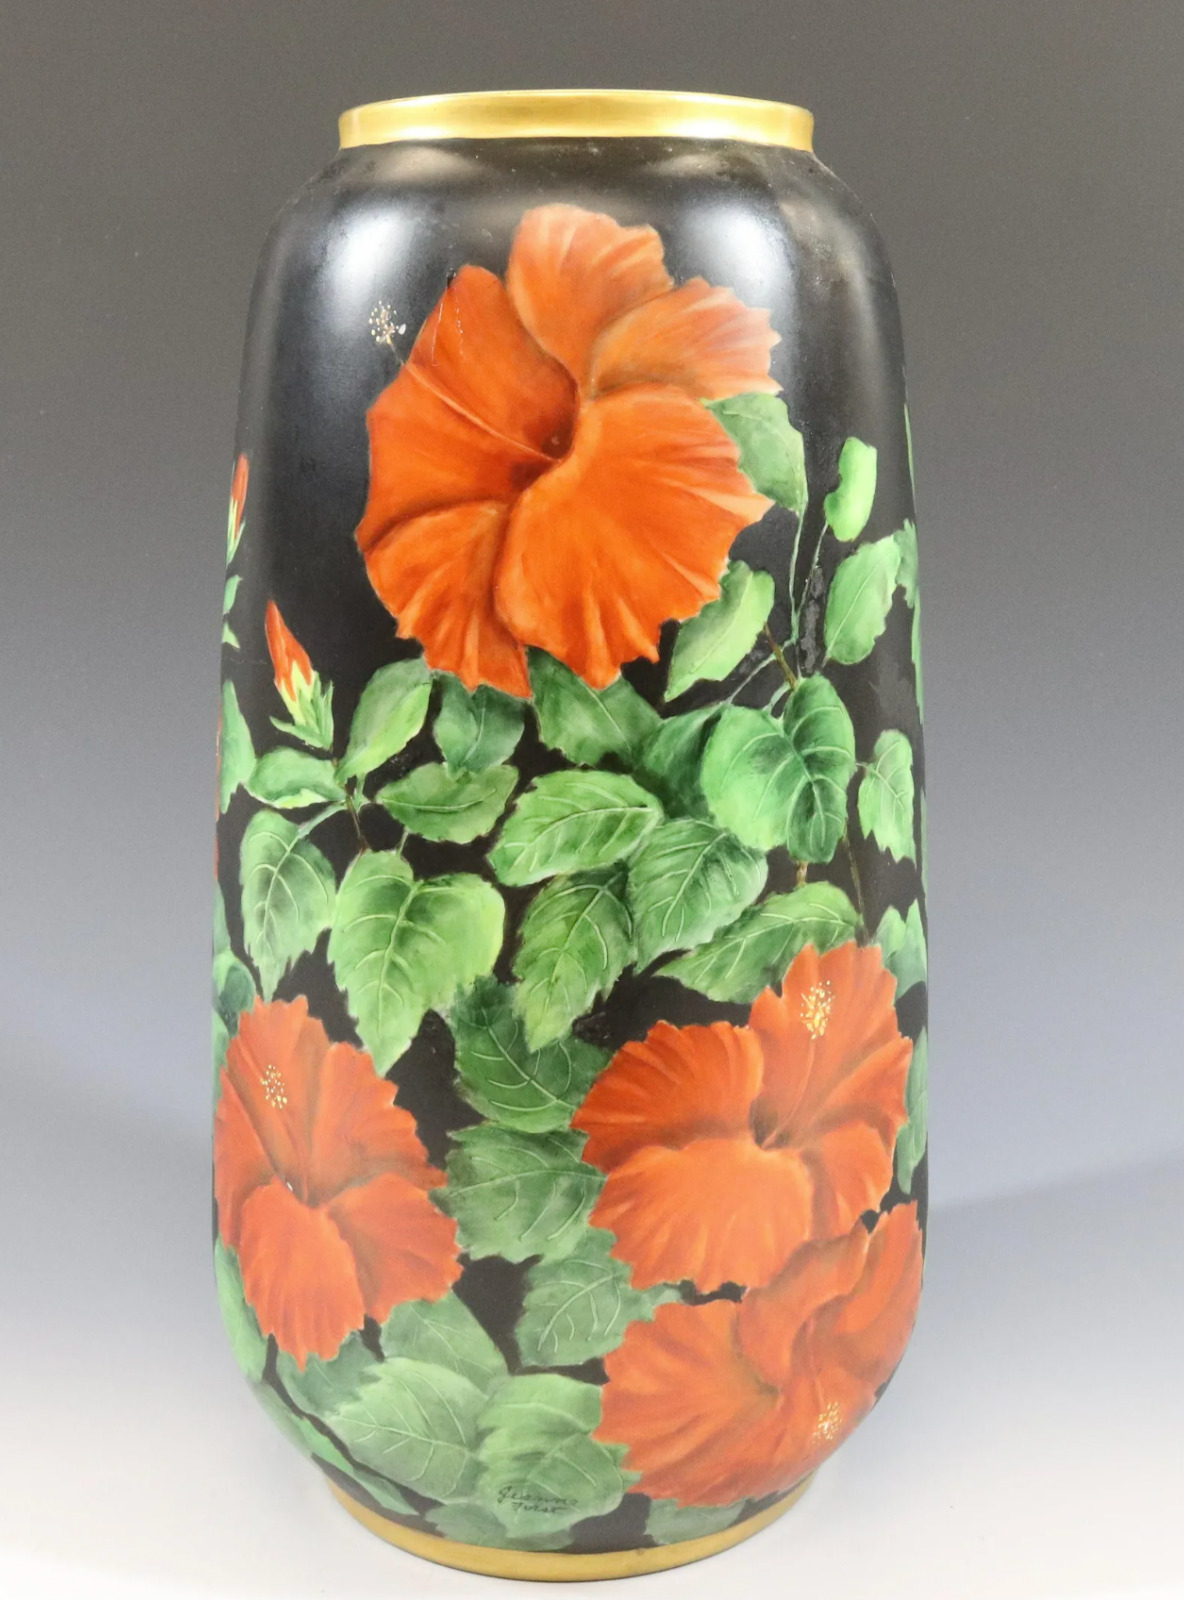 Amazing Large Hand Painted porcelain Vase by Jeanne Forst with Hibiscus Flowers